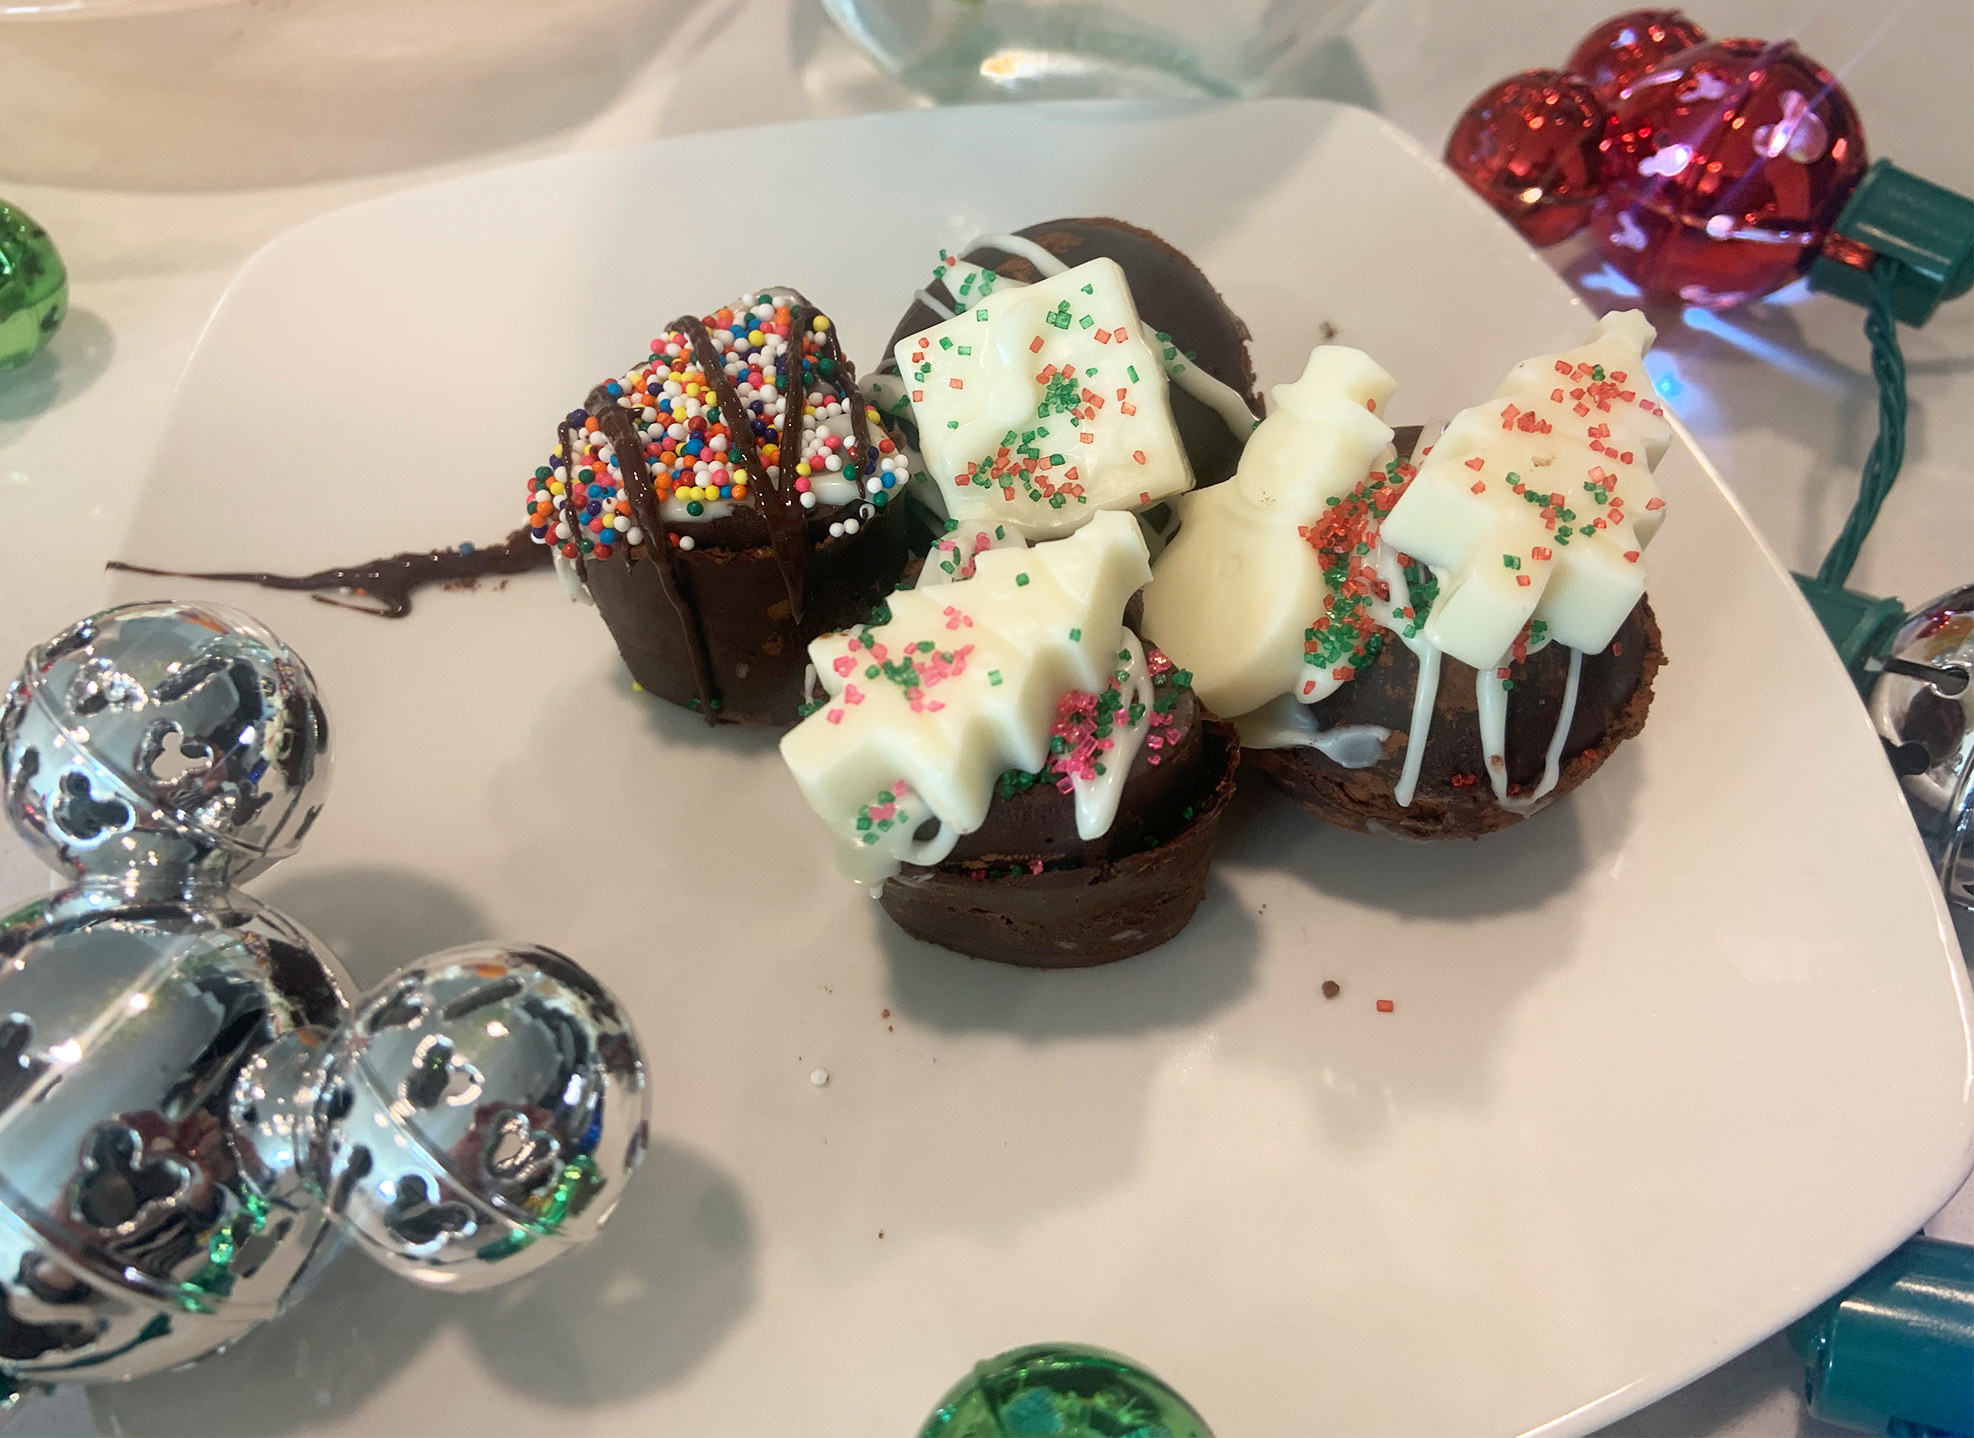 the finished cocoa bombs have sprinkles, drizzled chocolate, and little white chocolate embeds